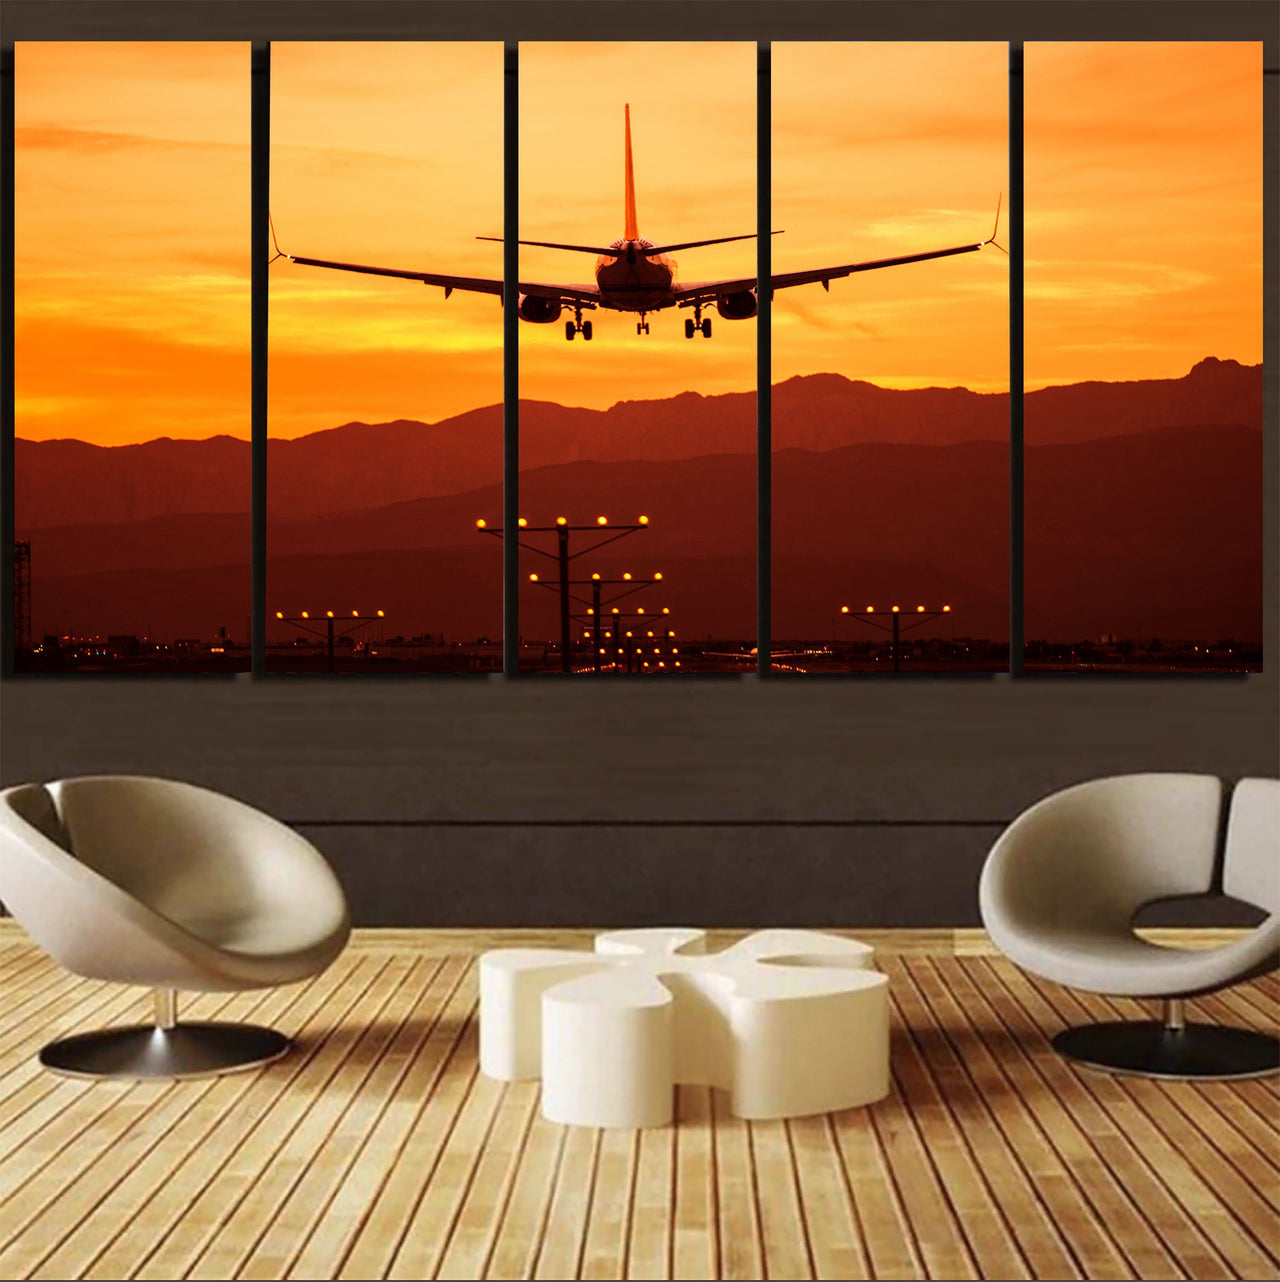 Landing Aircraft During Sunset Printed Canvas Prints (5 Pieces) Aviation Shop 